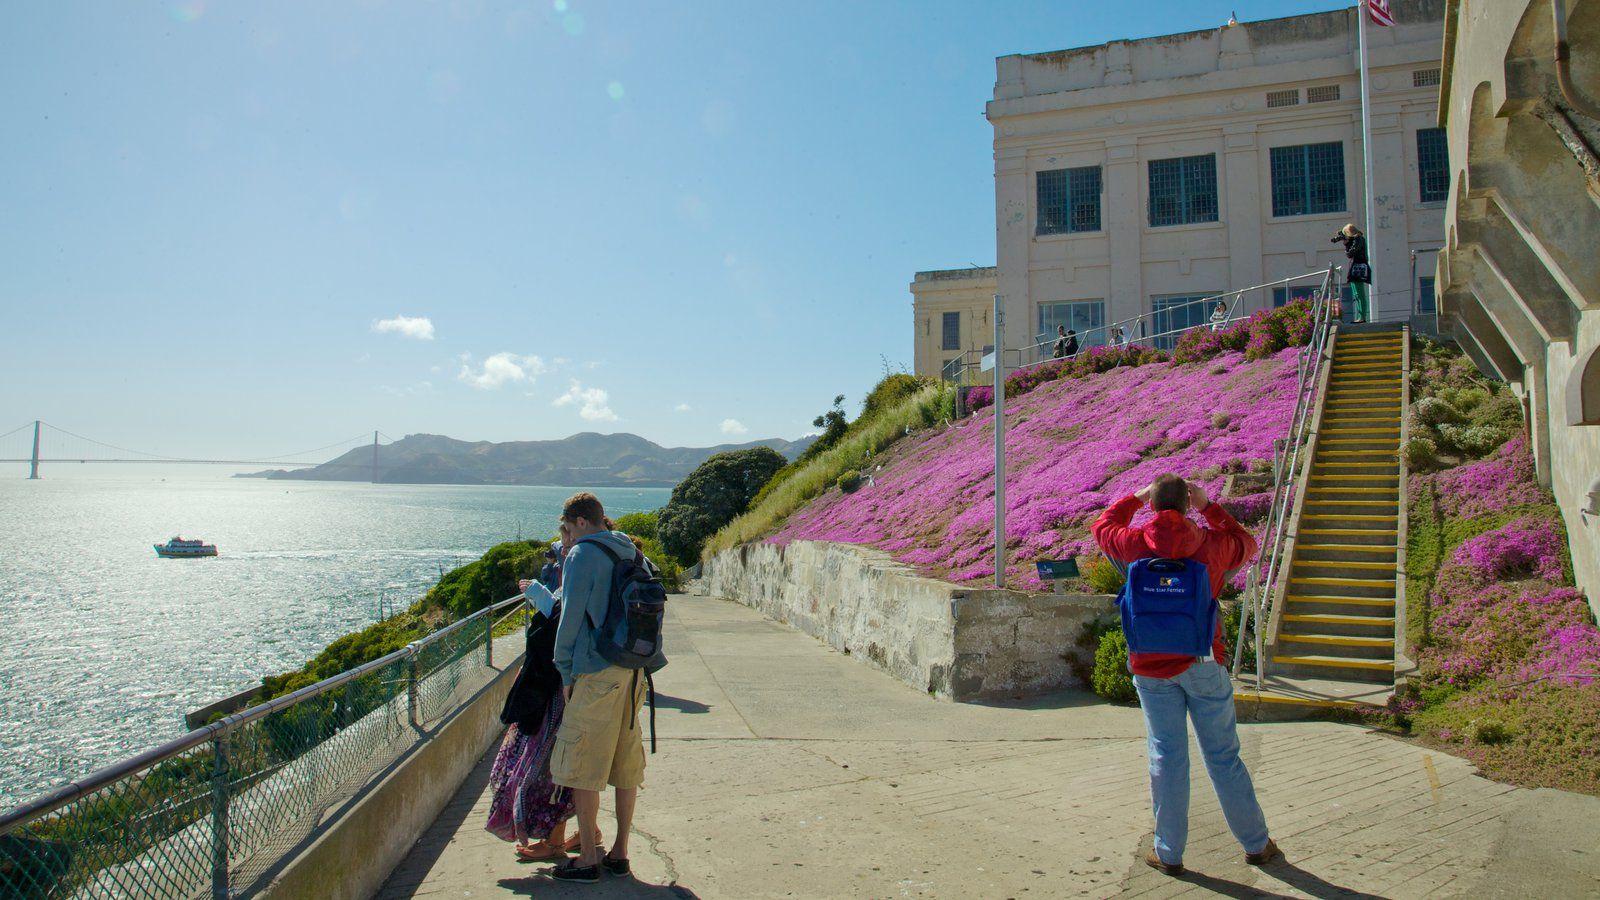 Flowers Pictures View Wallpaper of Alcatraz Island